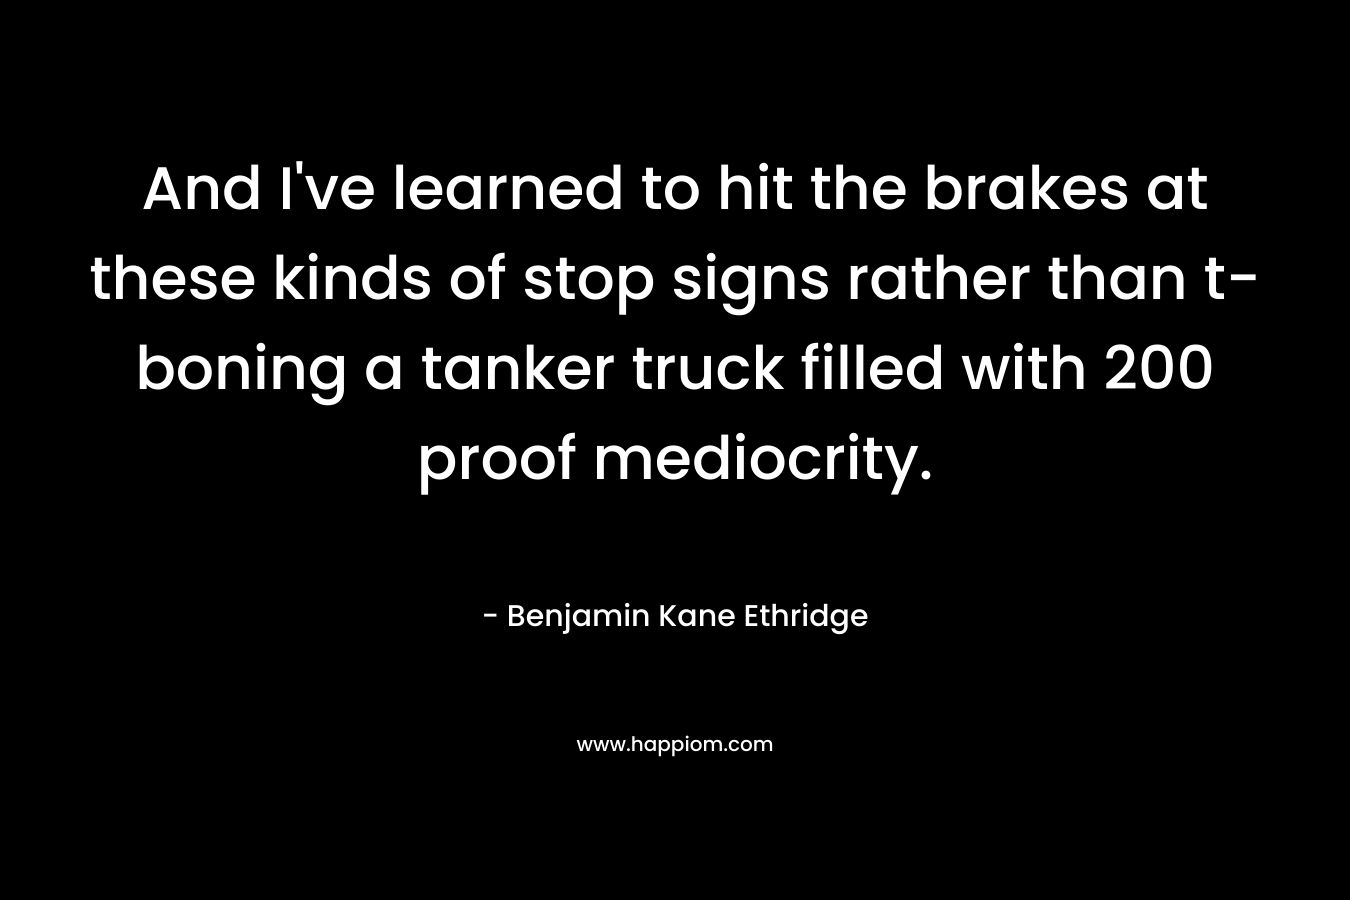 And I’ve learned to hit the brakes at these kinds of stop signs rather than t-boning a tanker truck filled with 200 proof mediocrity. – Benjamin Kane Ethridge